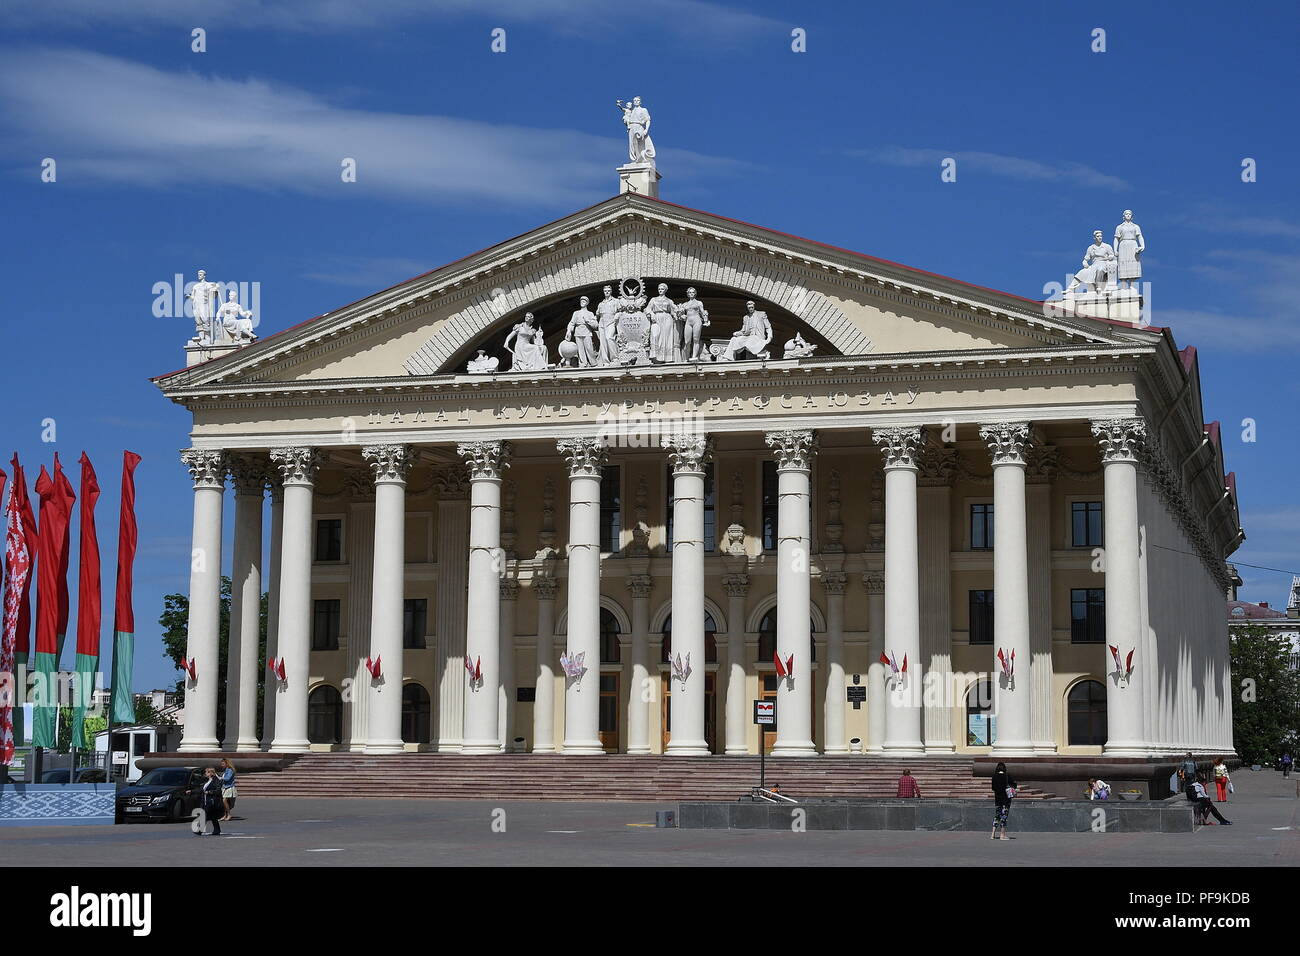 LABOUR UNION PALACE OF CULTURE IN MINSK, BELARUS. Stock Photo